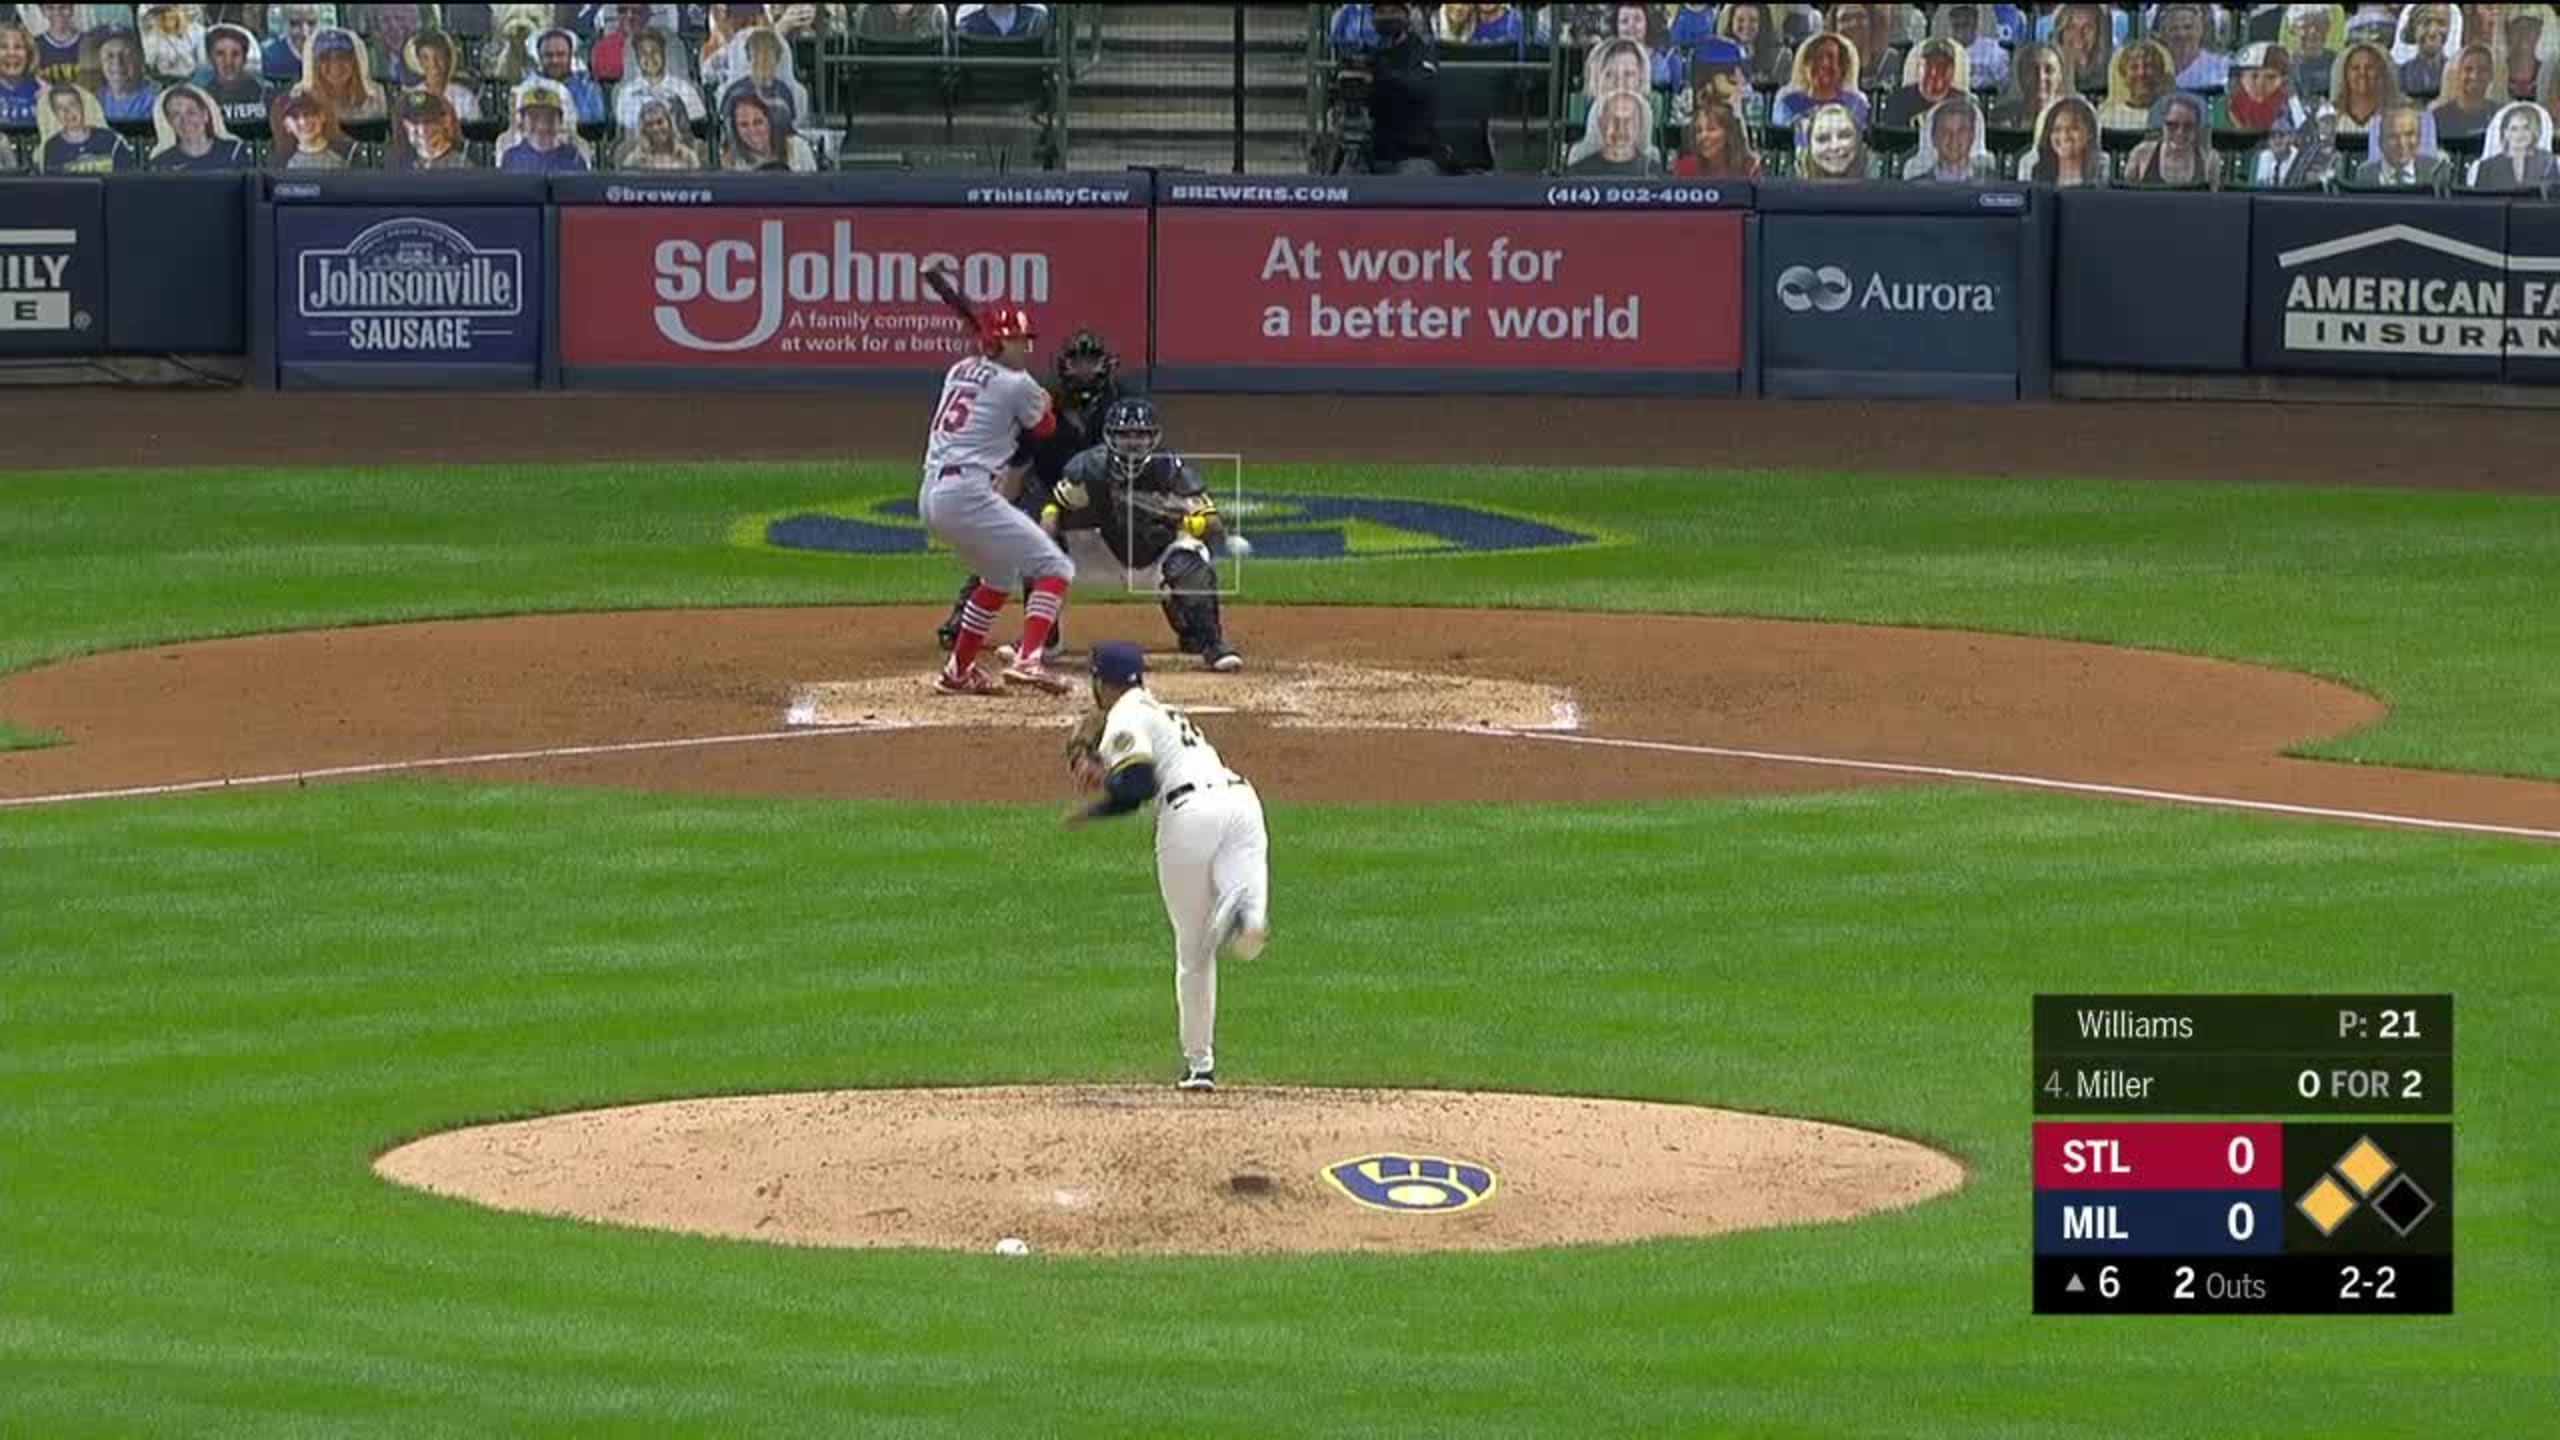 Devin Williams' Changeup and the Nastiest Pitches From 8/31